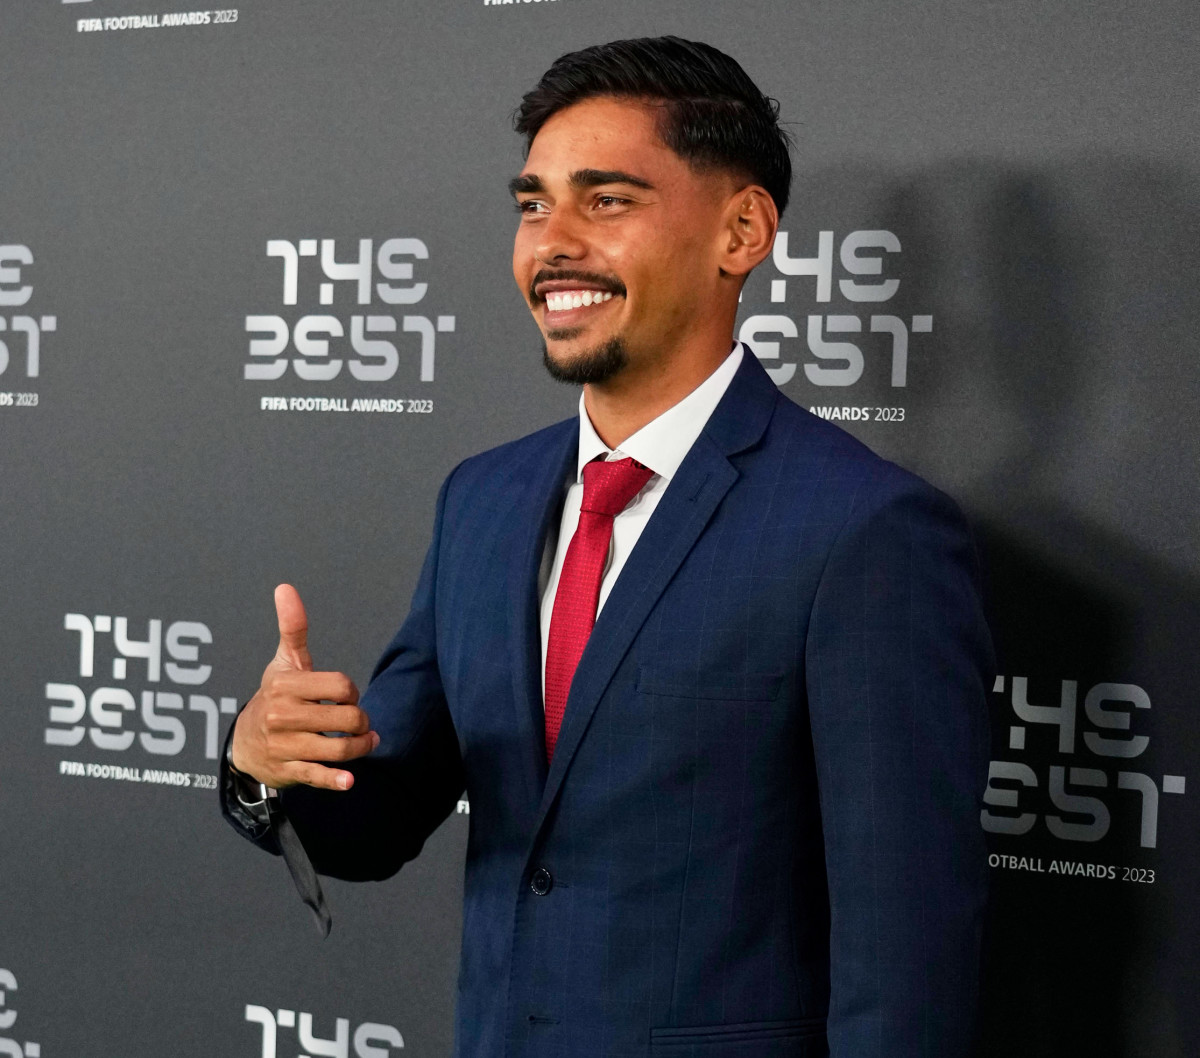 Guilherme Madruga pictured at The Best FIFA Football Awards 2023 where he won the FIFA Puskas Award